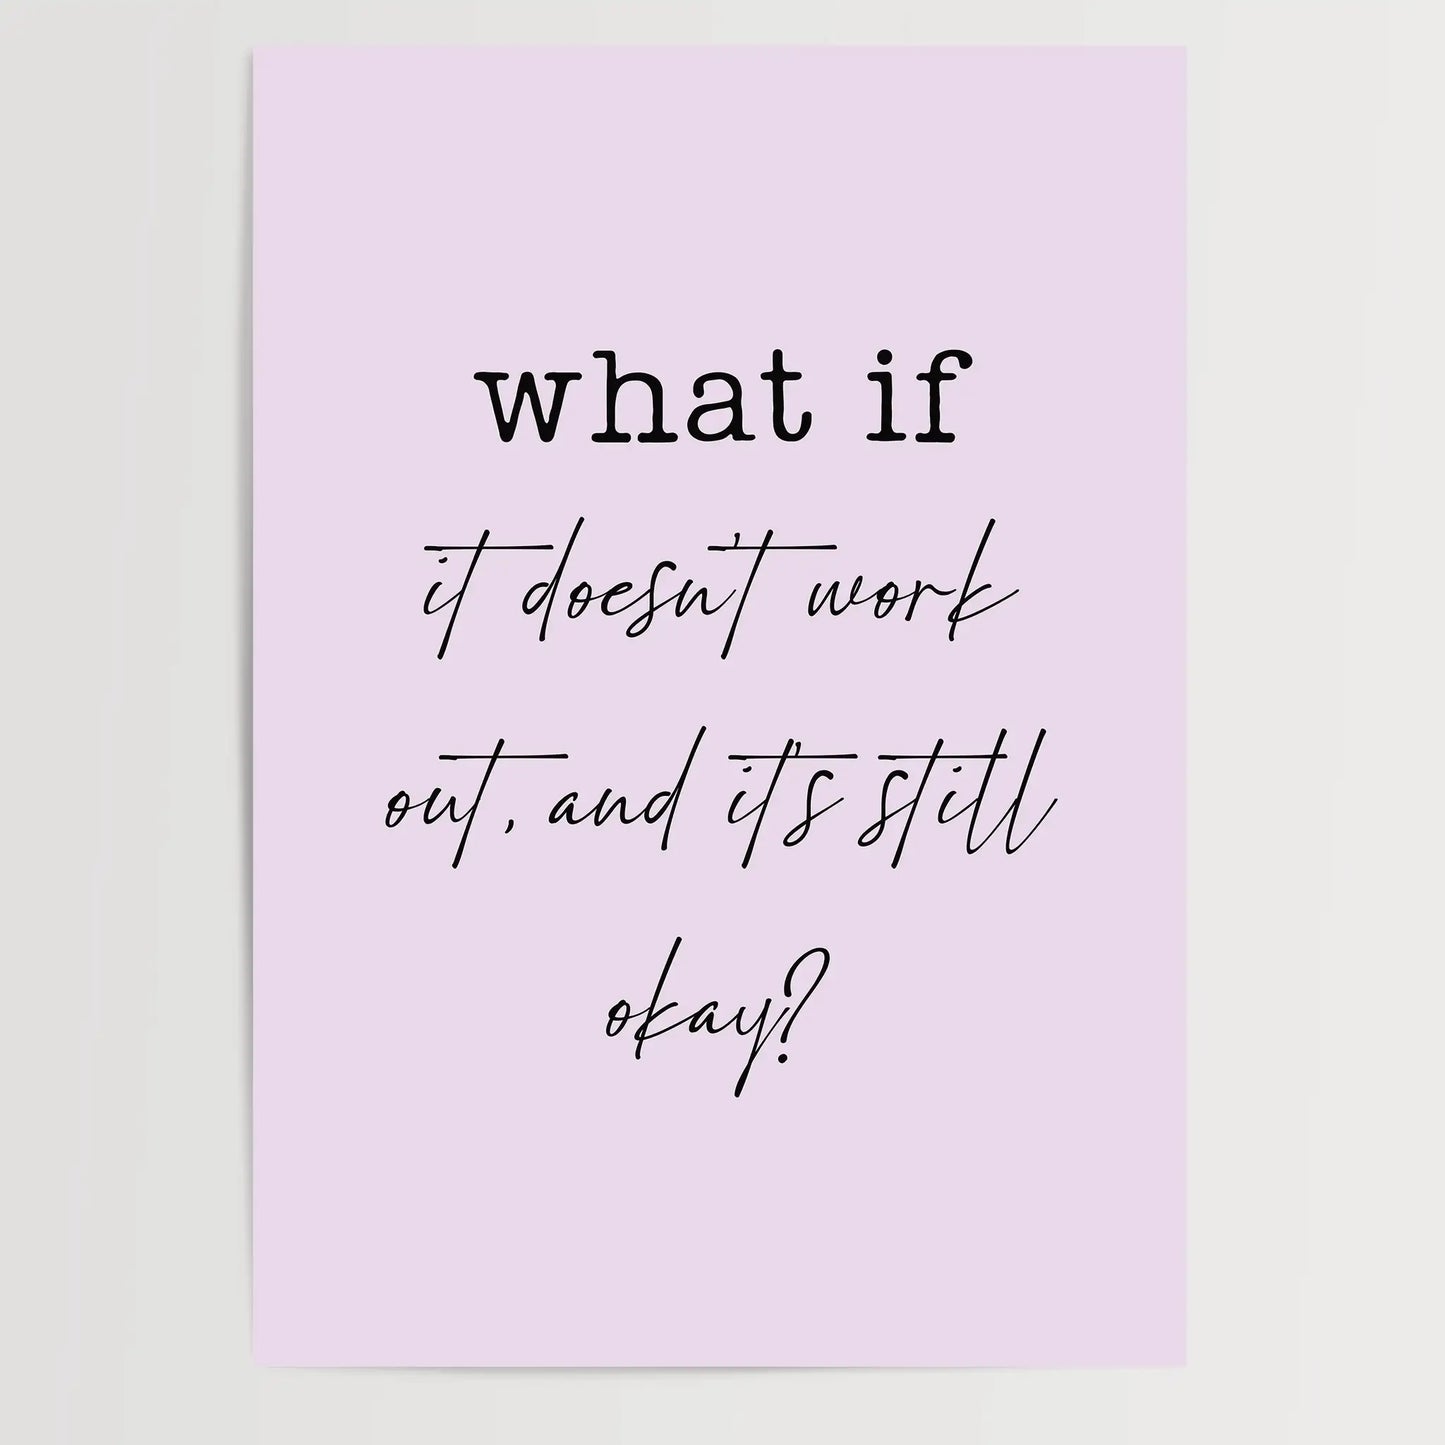 WHAT IF it doesn't work out, and it's still okay? - Poster